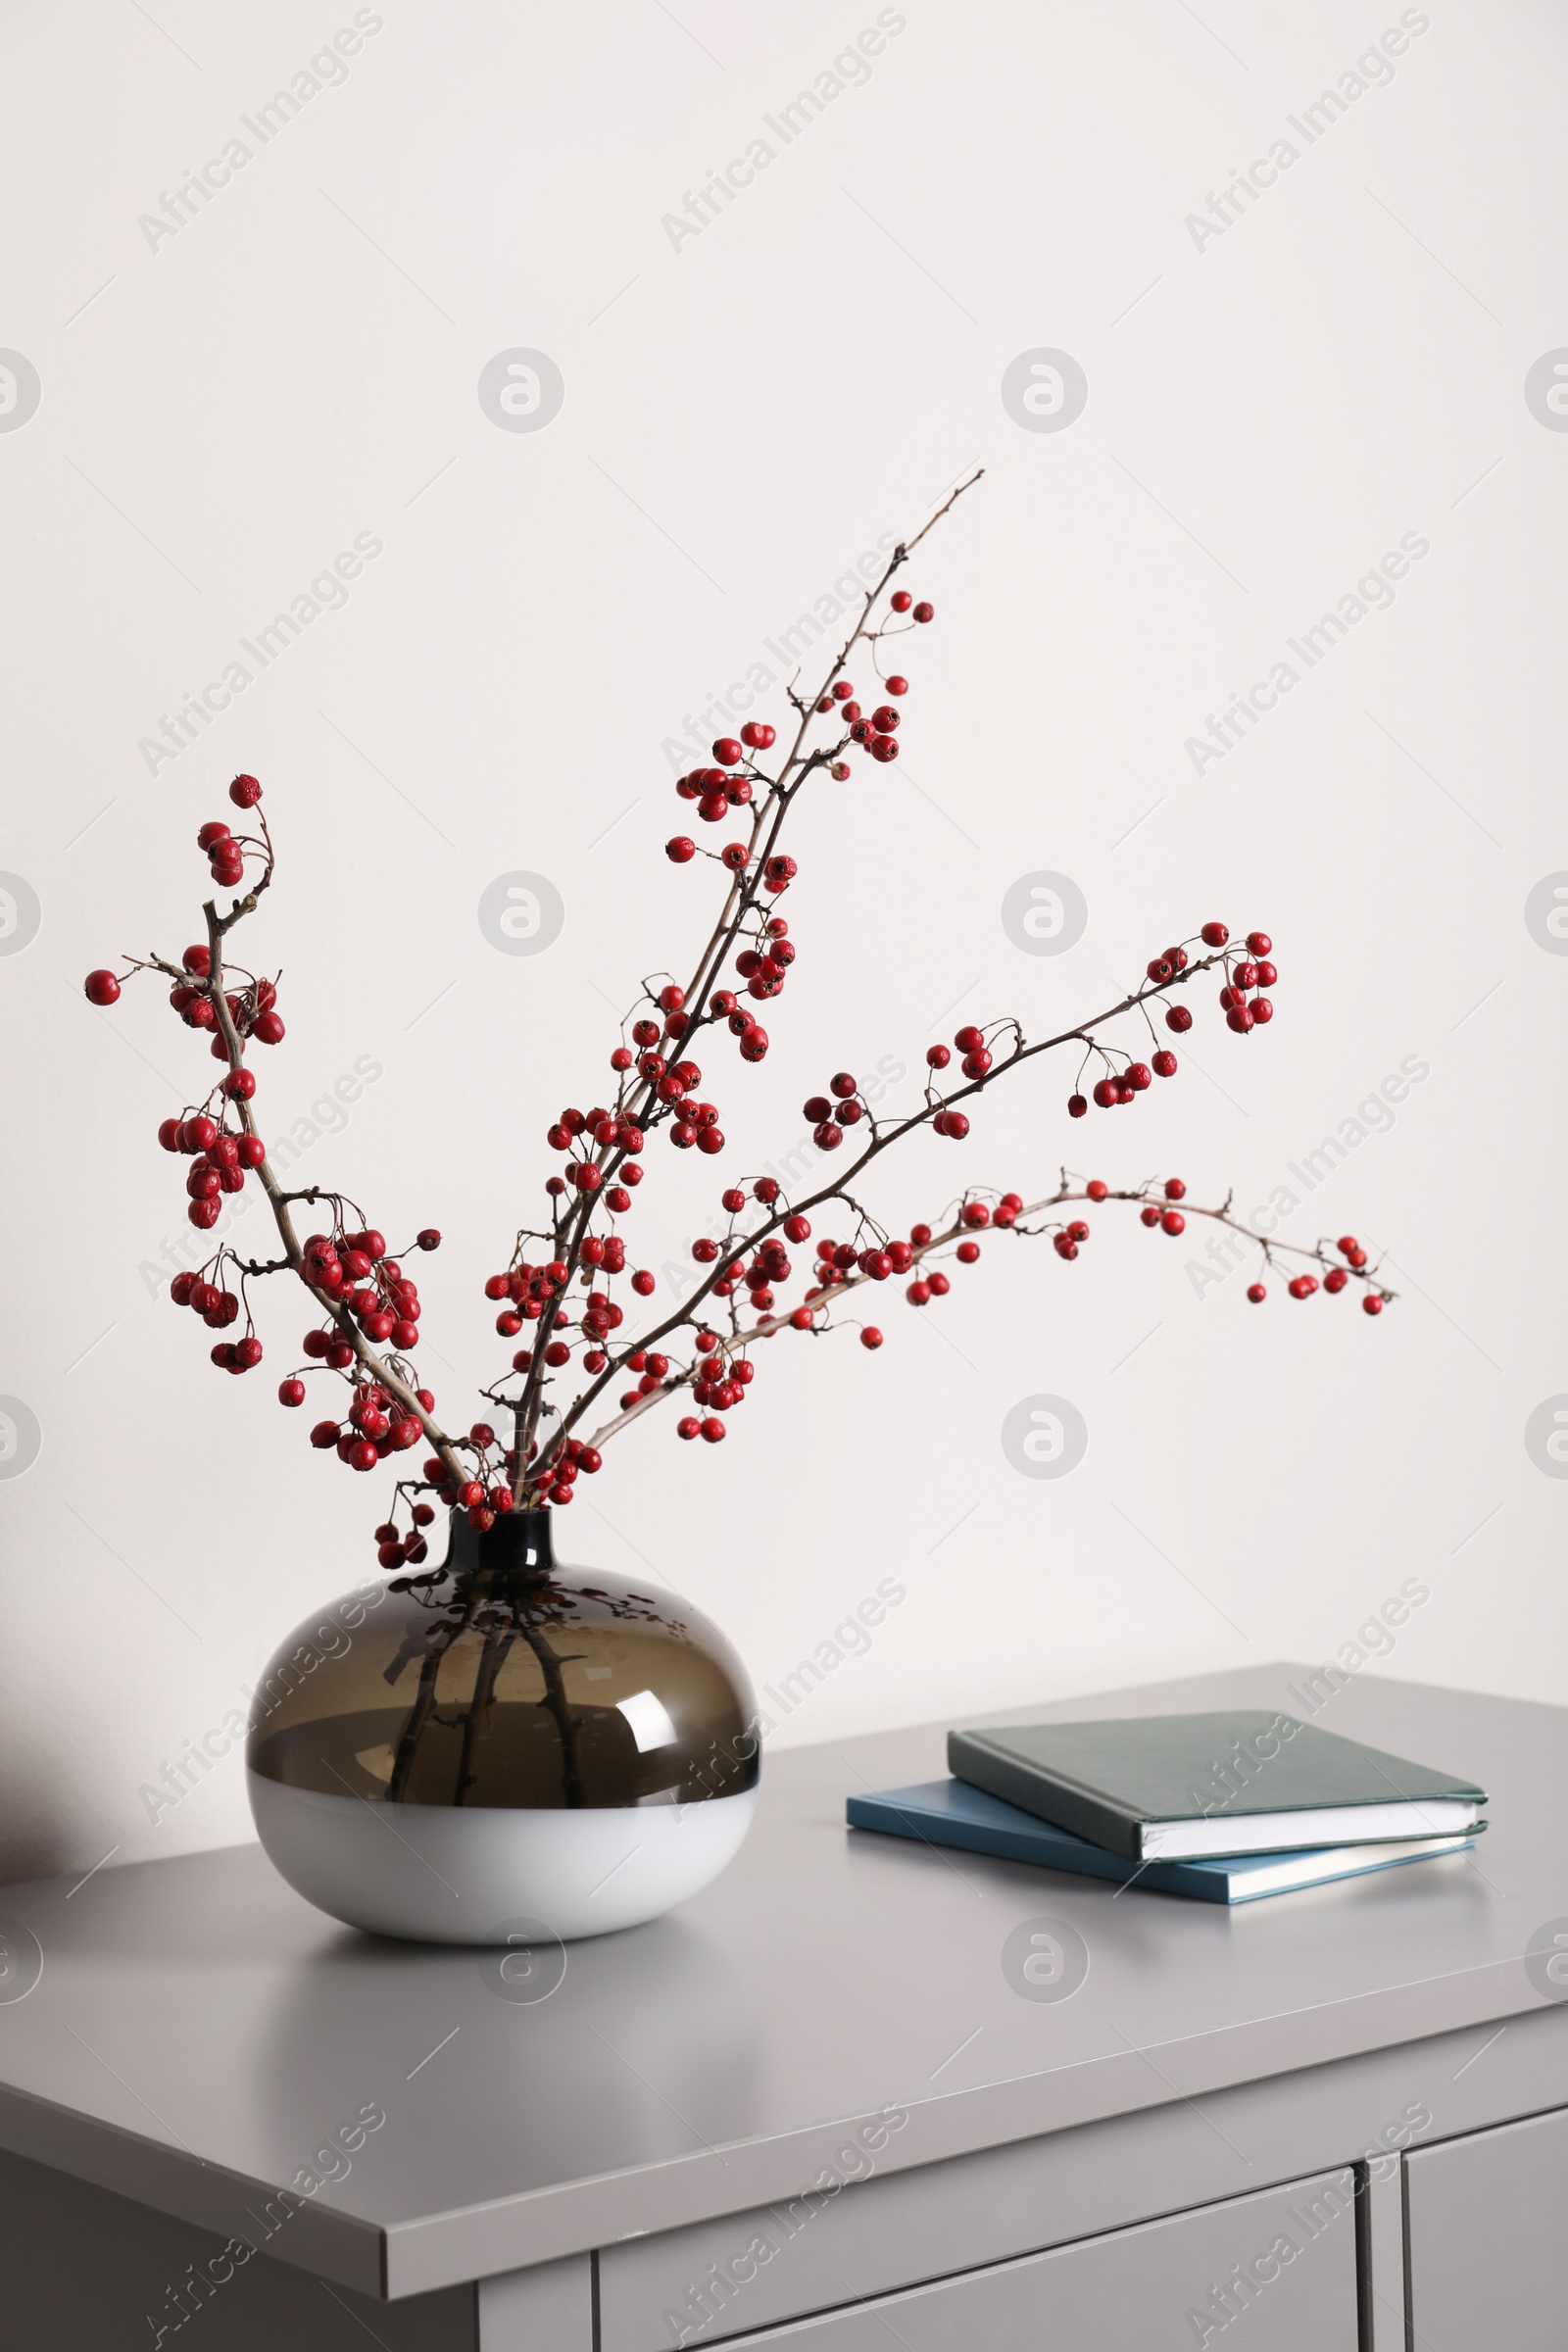 Photo of Hawthorn branches with red berries in vase and books on grey table indoors